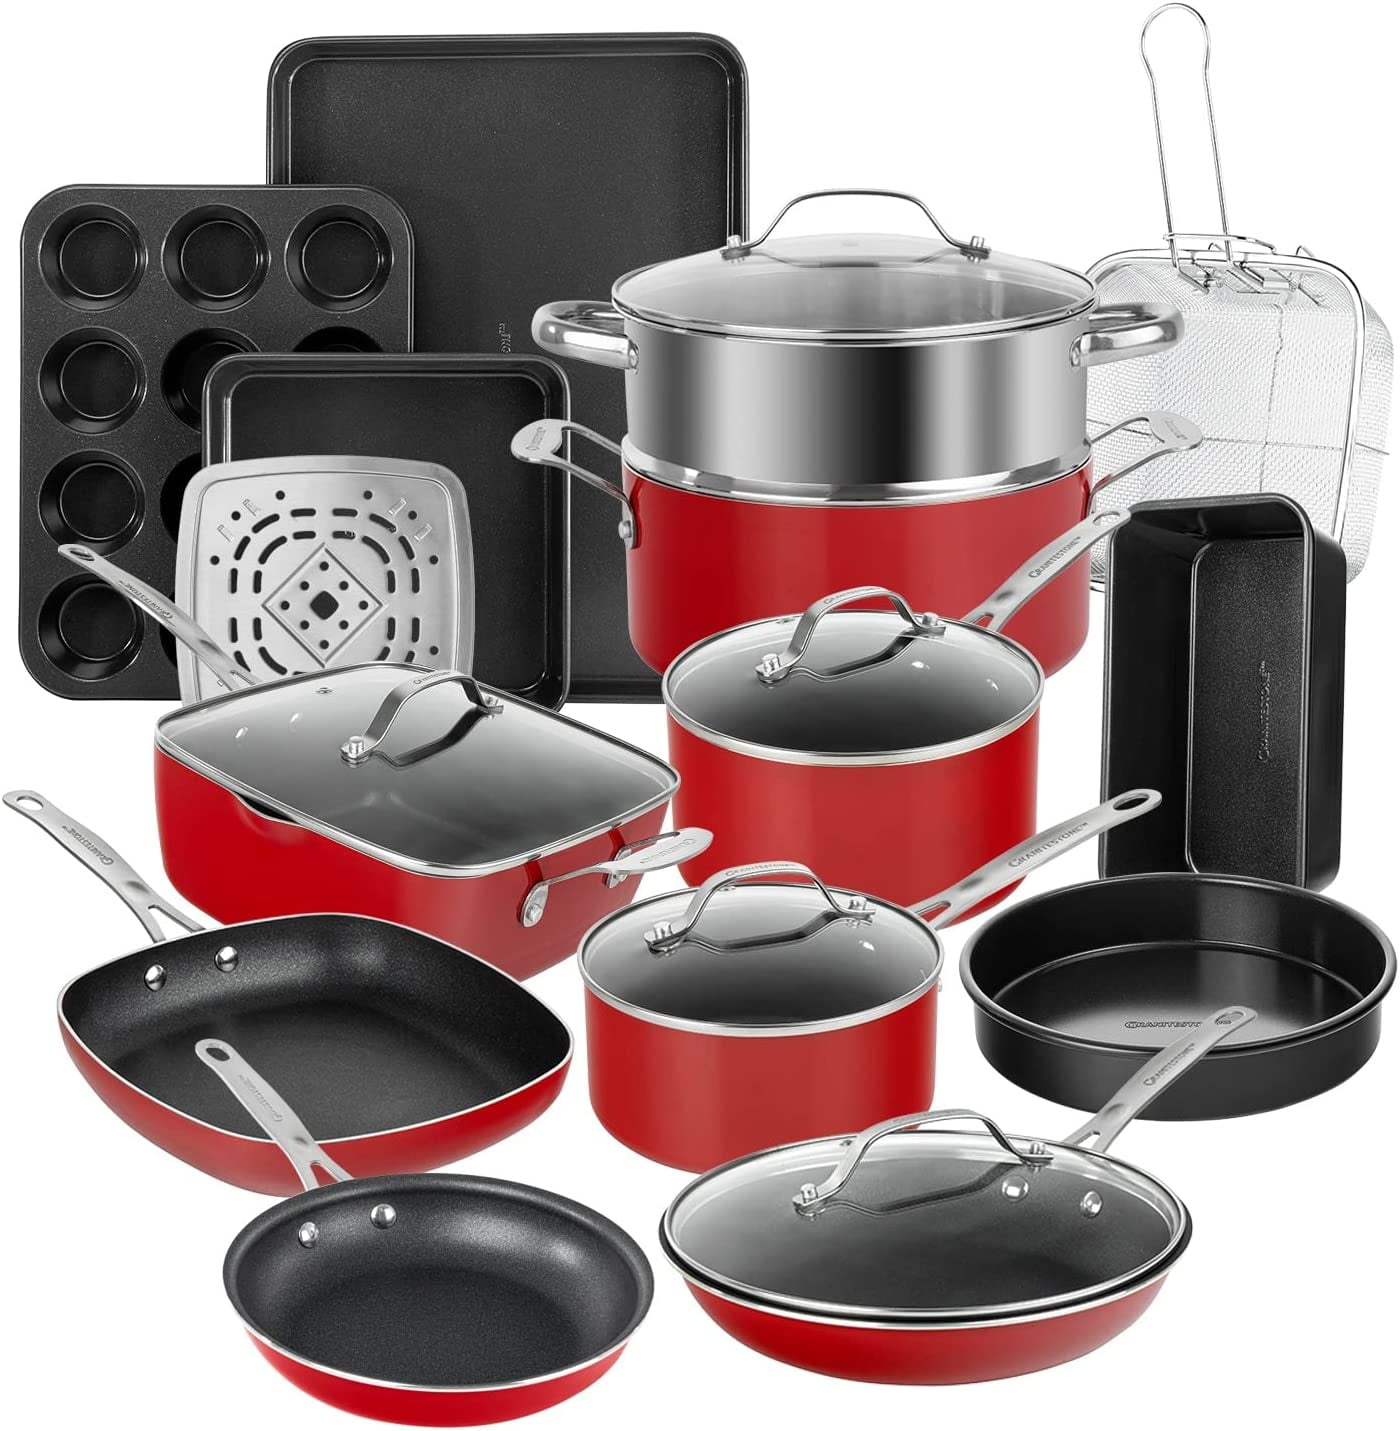 Nutrichef 12 Piece Pots & Pans Non-Stick Cookware Set, Dark Gray and Red